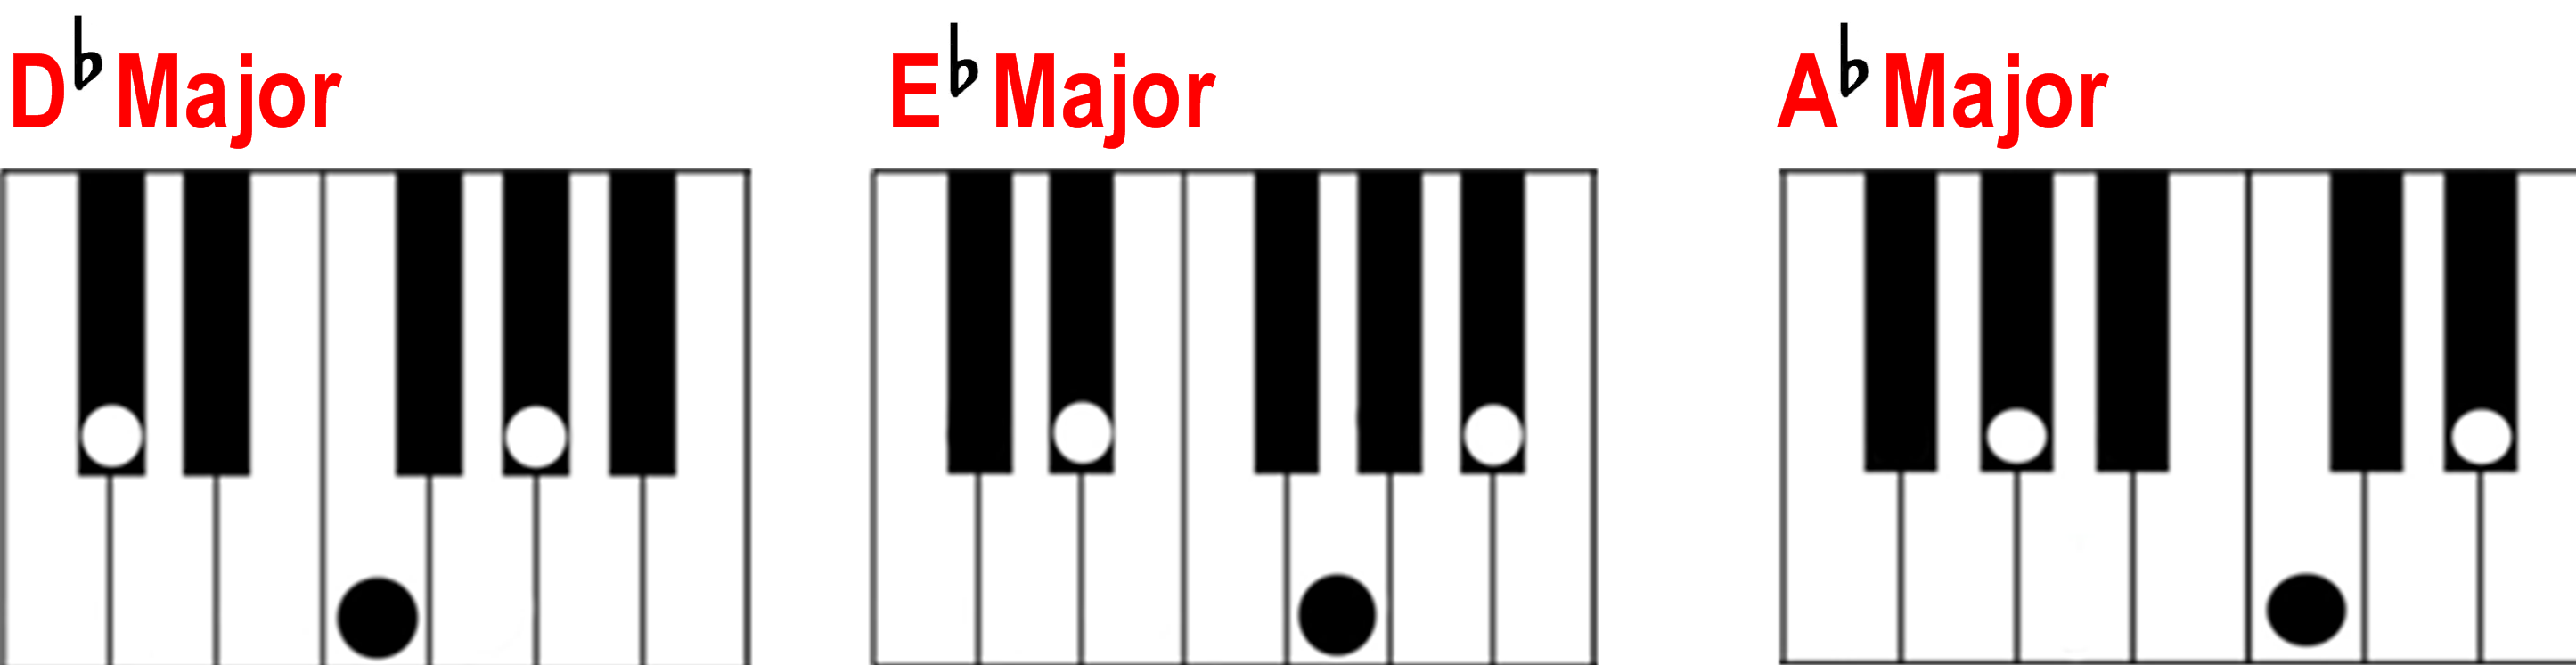 Finding a Major Chord on the Piano